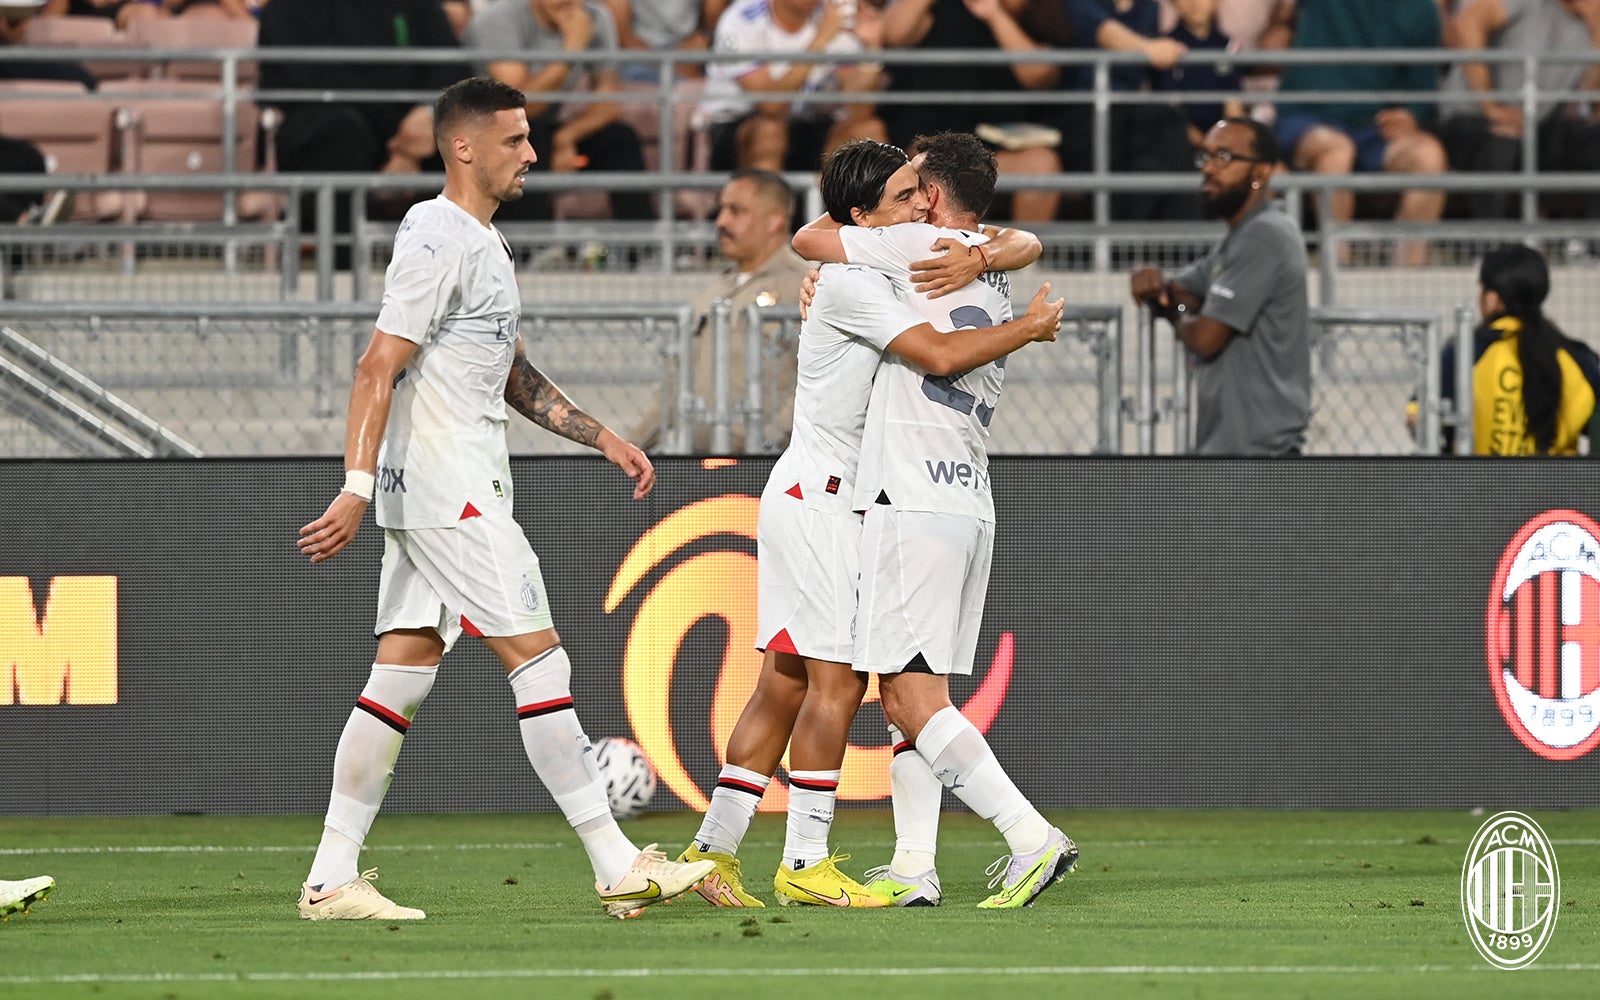 More Soccer At Yankee Stadium: AC Milan vs. Real Madrid In August! -  Gothamist